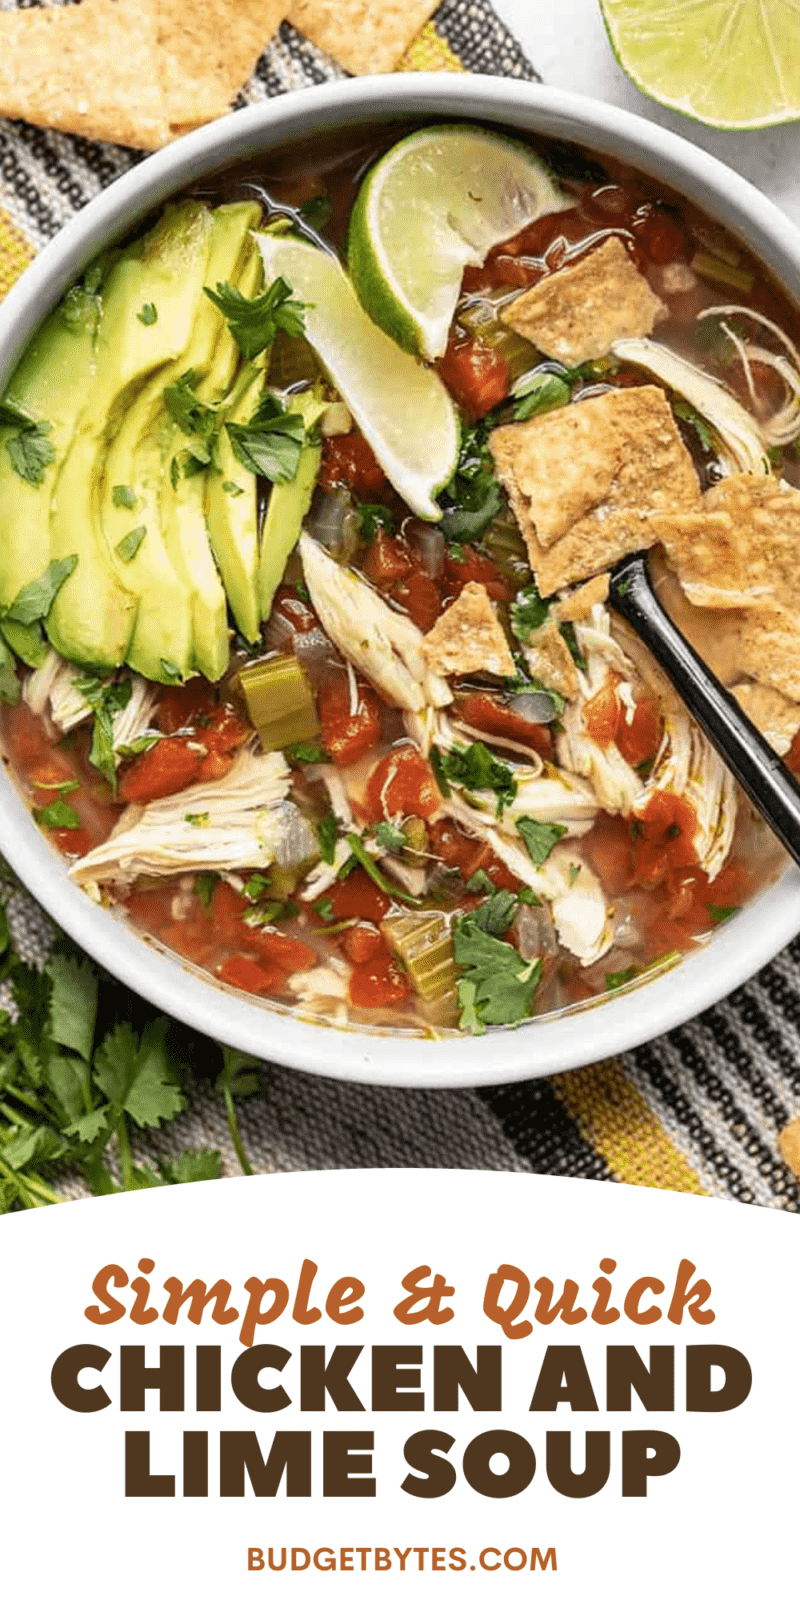 https://www.budgetbytes.com/wp-content/uploads/2019/08/Chicken-and-Lime-Soup-1-800x1600.png